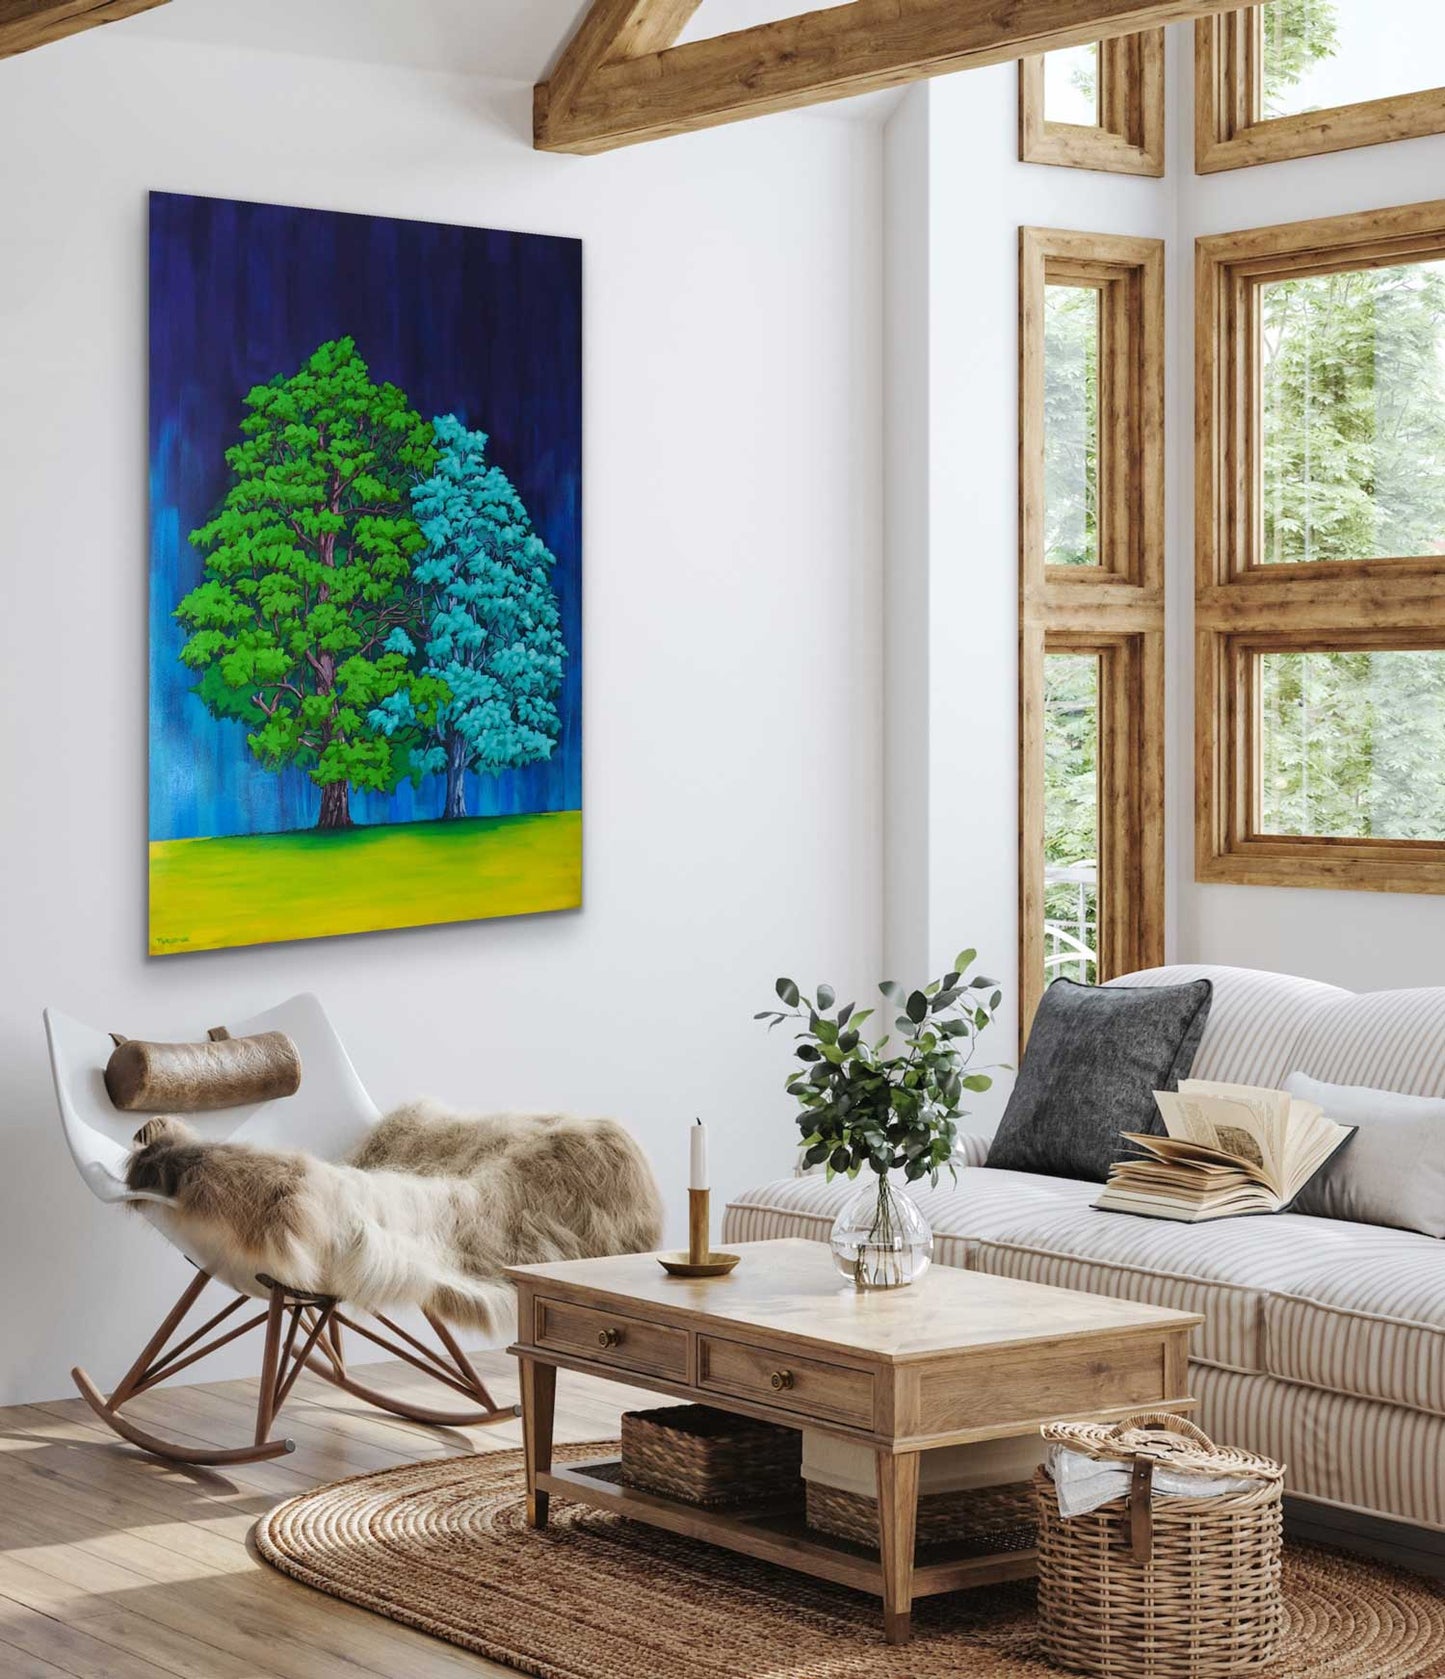 Large twin trees from the Jardin Botanique de Montréal, large original painting by a professional Canadian landscape artist. visual art ready to hang on your wall.